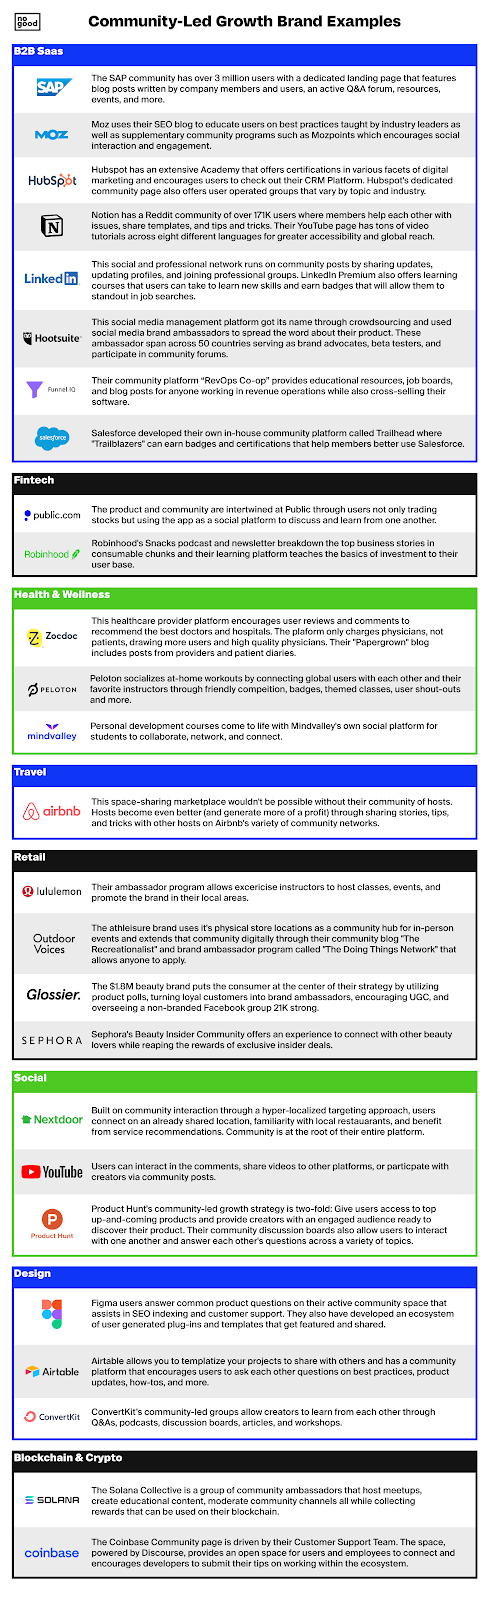 Community-led growth brand matrix with company examples